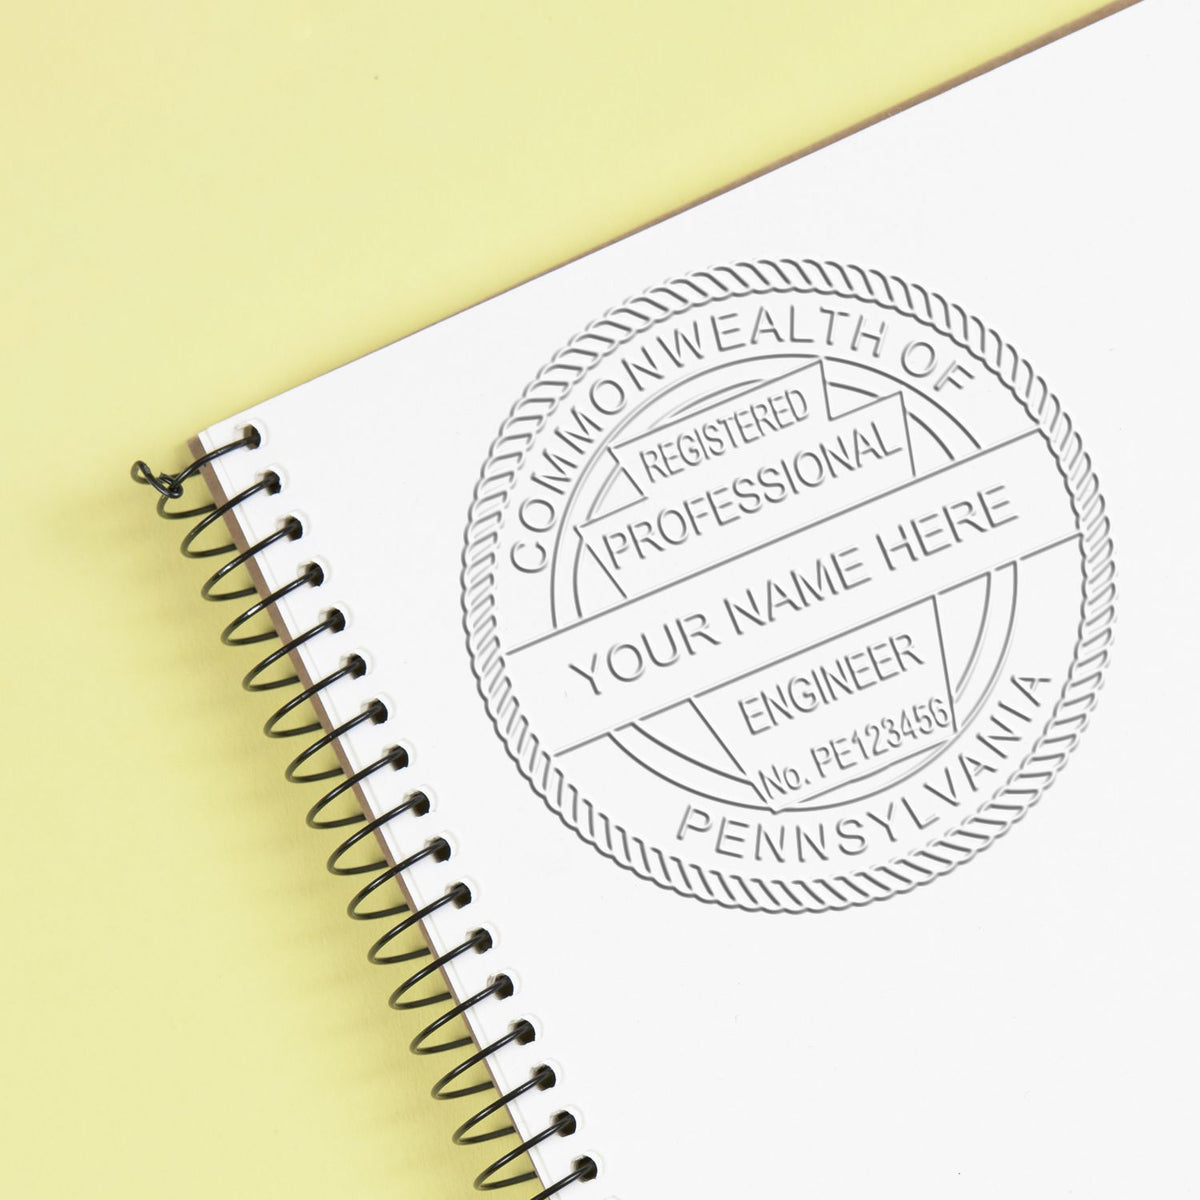 The Gift Pennsylvania Engineer Seal stamp impression comes to life with a crisp, detailed image stamped on paper - showcasing true professional quality.